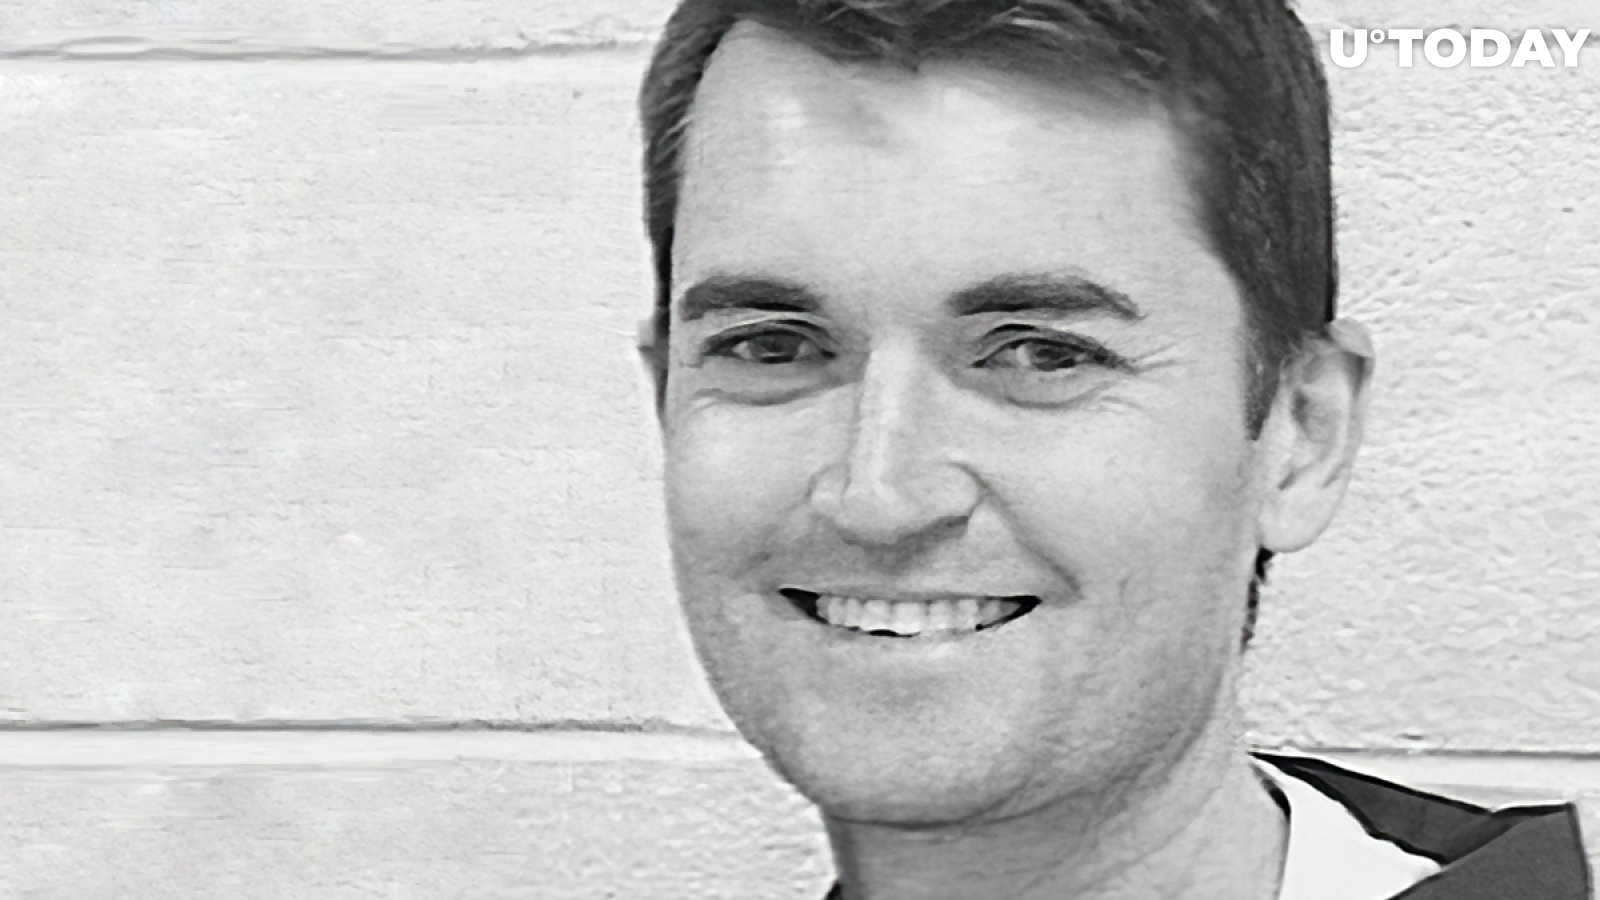 Silk Road Founder Ross Ulbricht Should Get Pardoned, Says Prominent Conservative Commentator 